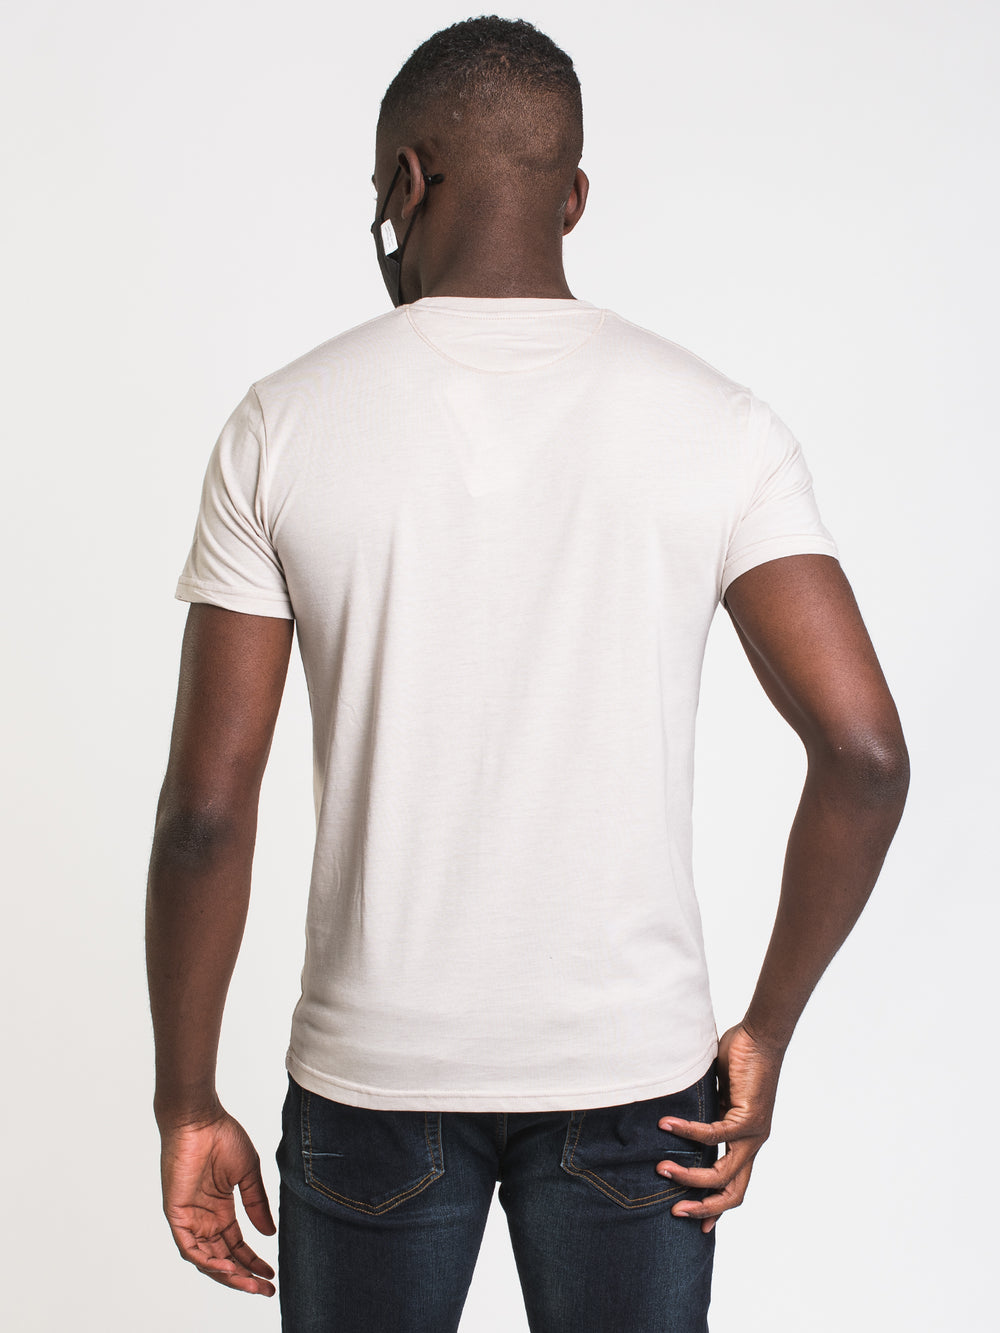 TENTREE LOGO CL PUFF T-SHIRT  - CLEARANCE